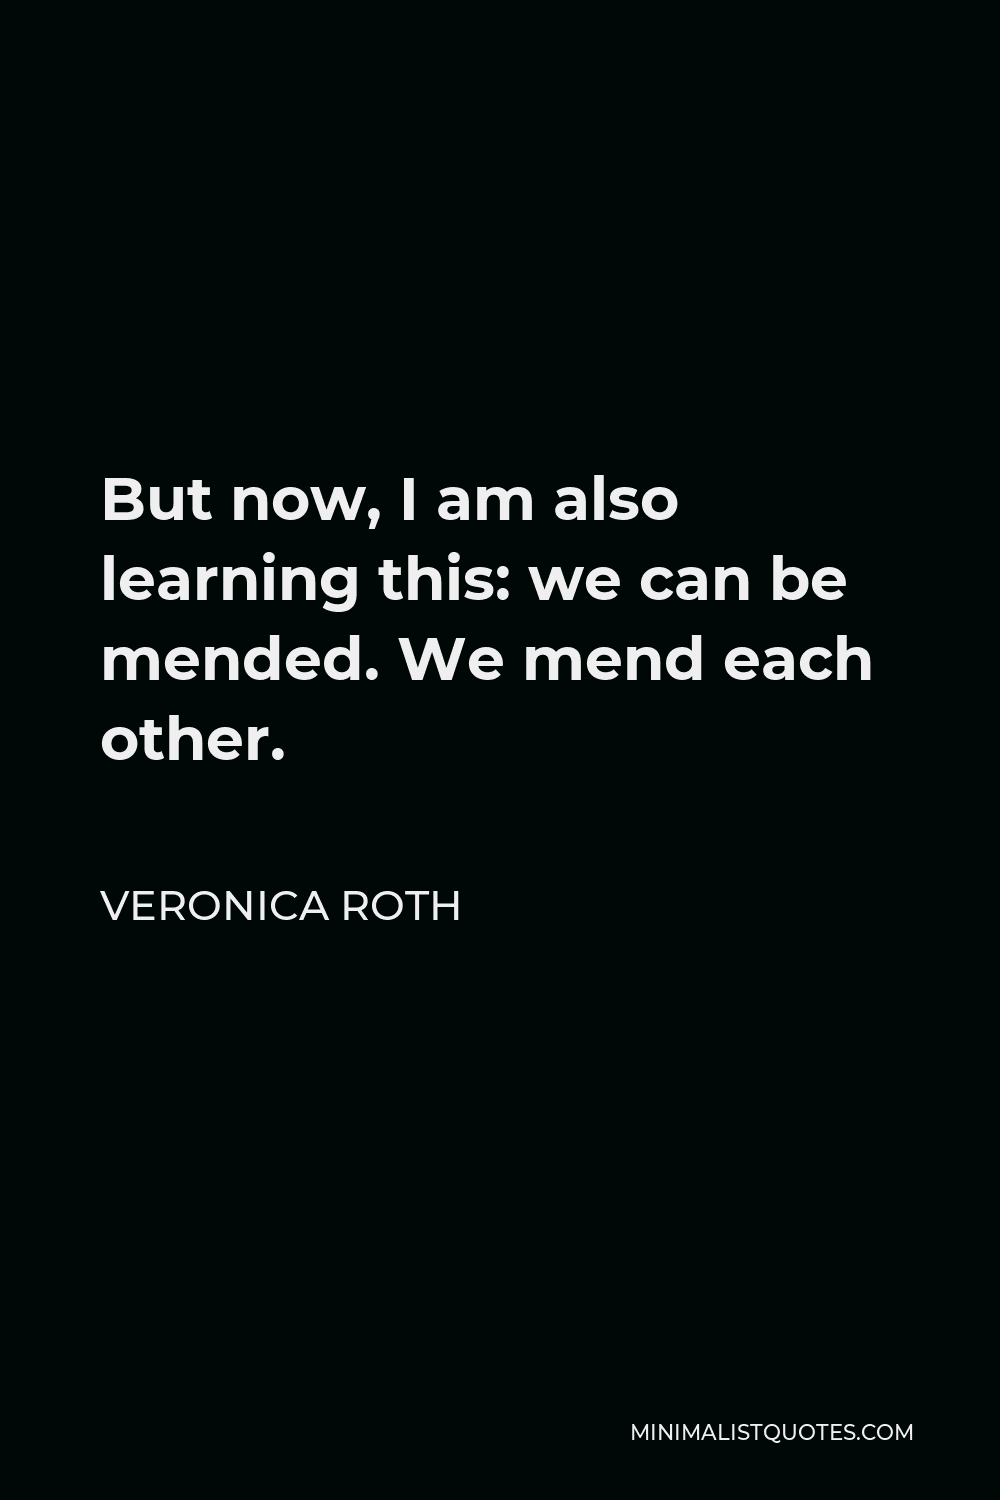 Veronica Roth Quote - But now, I am also learning this: we can be mended. We mend each other.